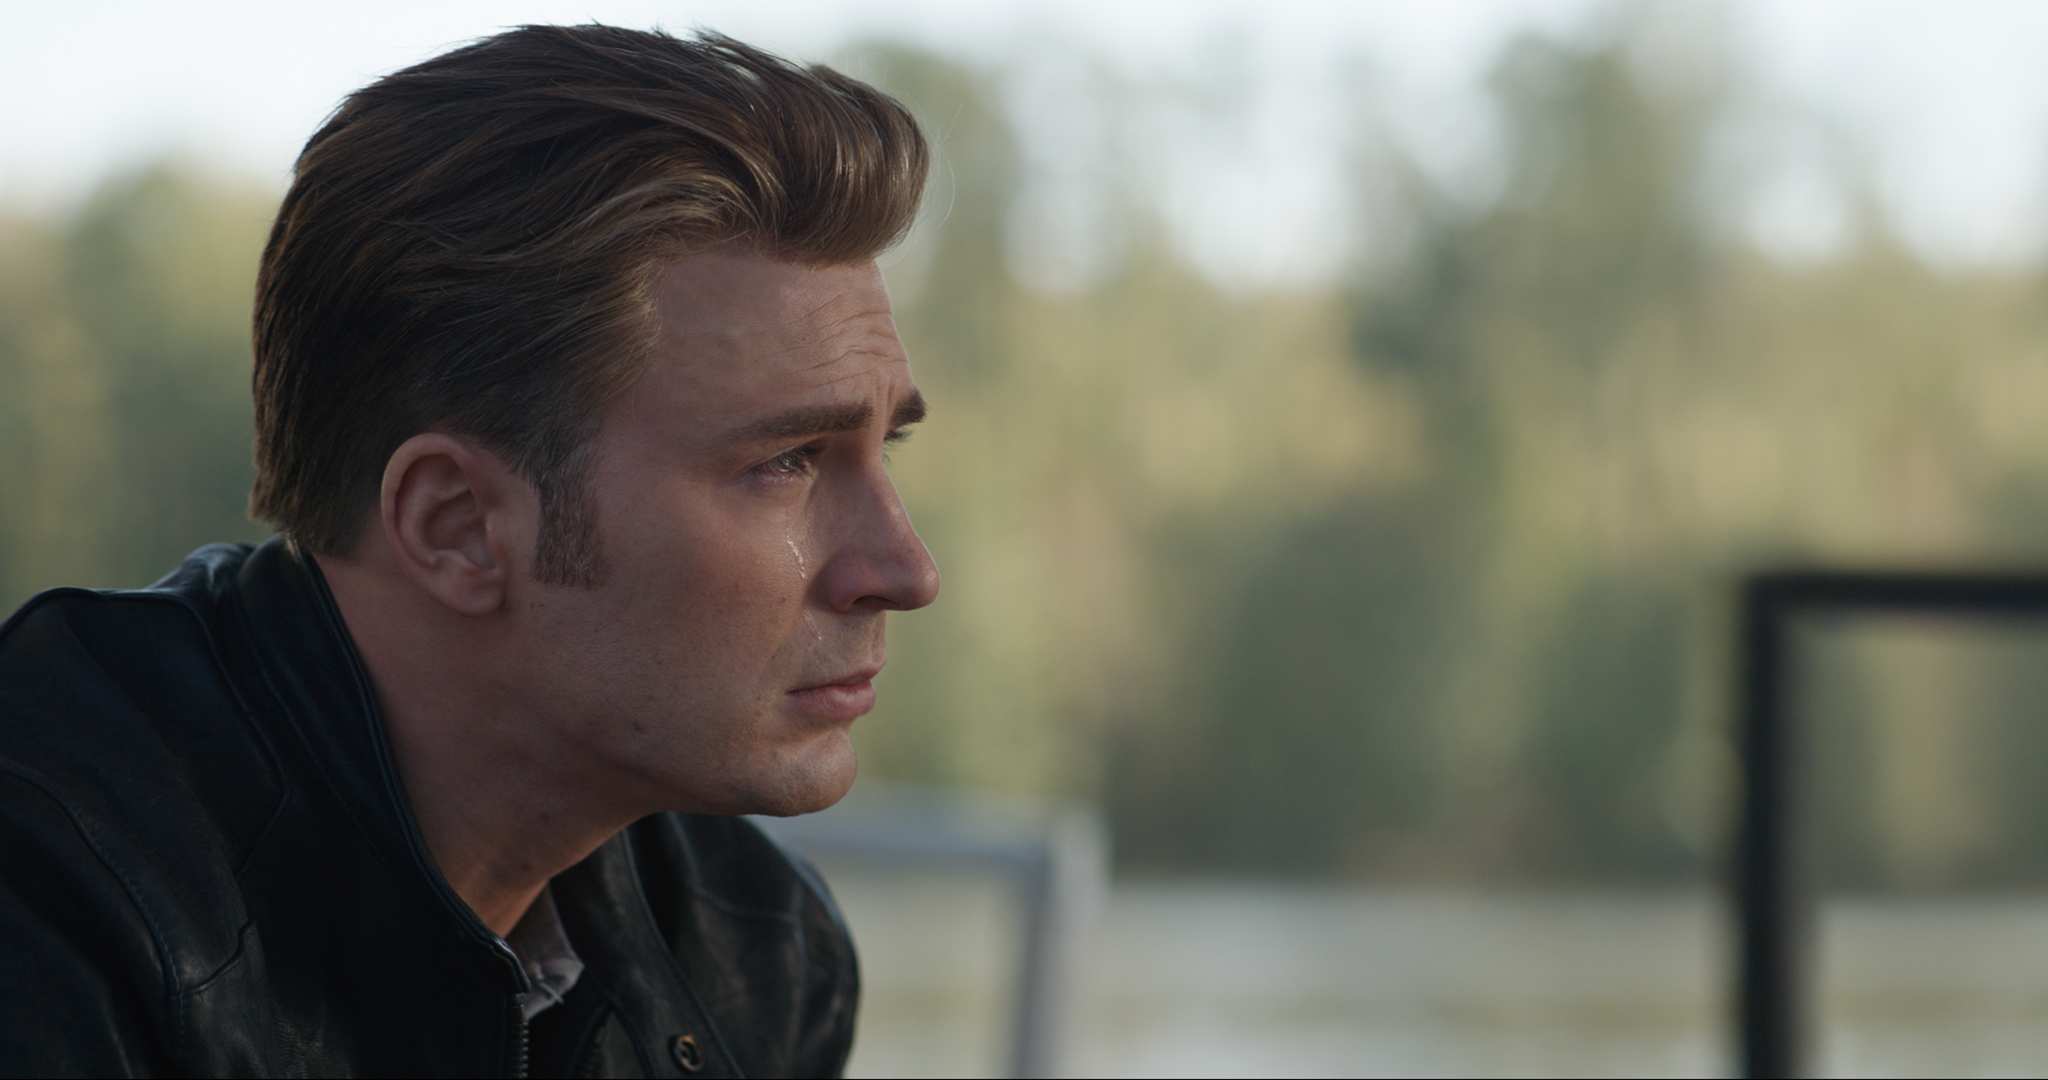 Avengers: Endgame Image Tease Emotional Reunions And Team Ups